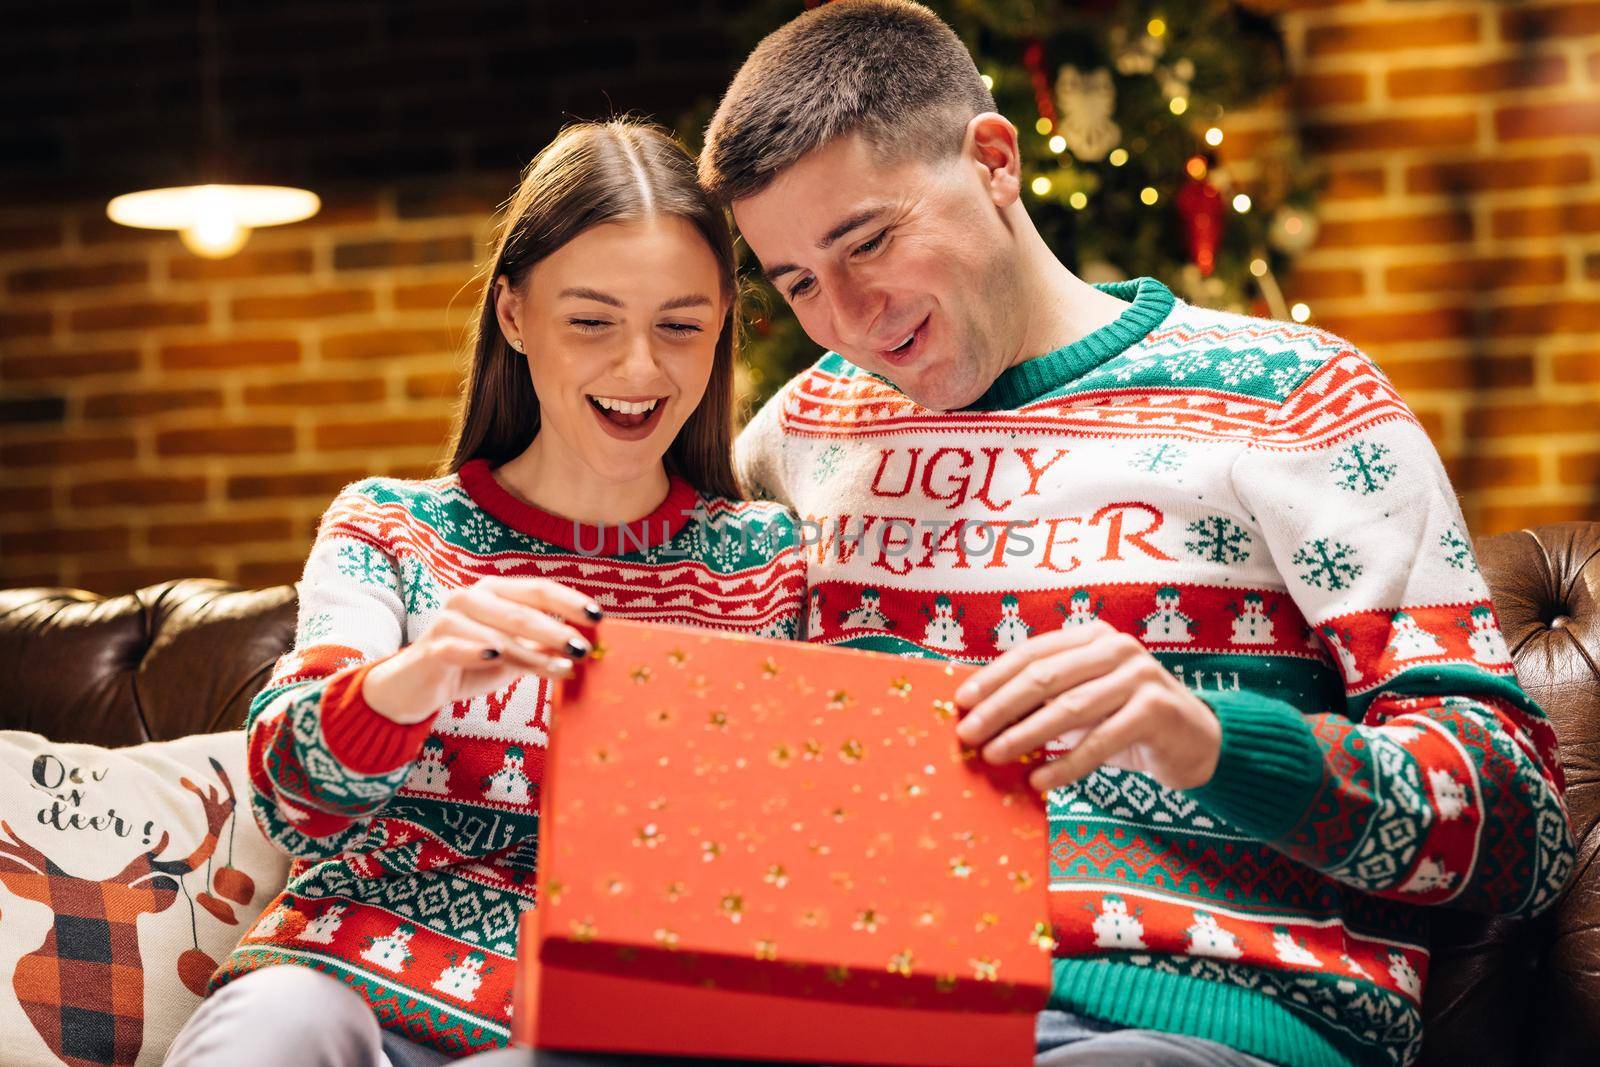 Concept of holidays, romance, surprise, e-commerce, Xmas, Holiday miracle. Happy man is making christmas gift to his beloved woman. The woman is surprised and excited after opening received gift box.